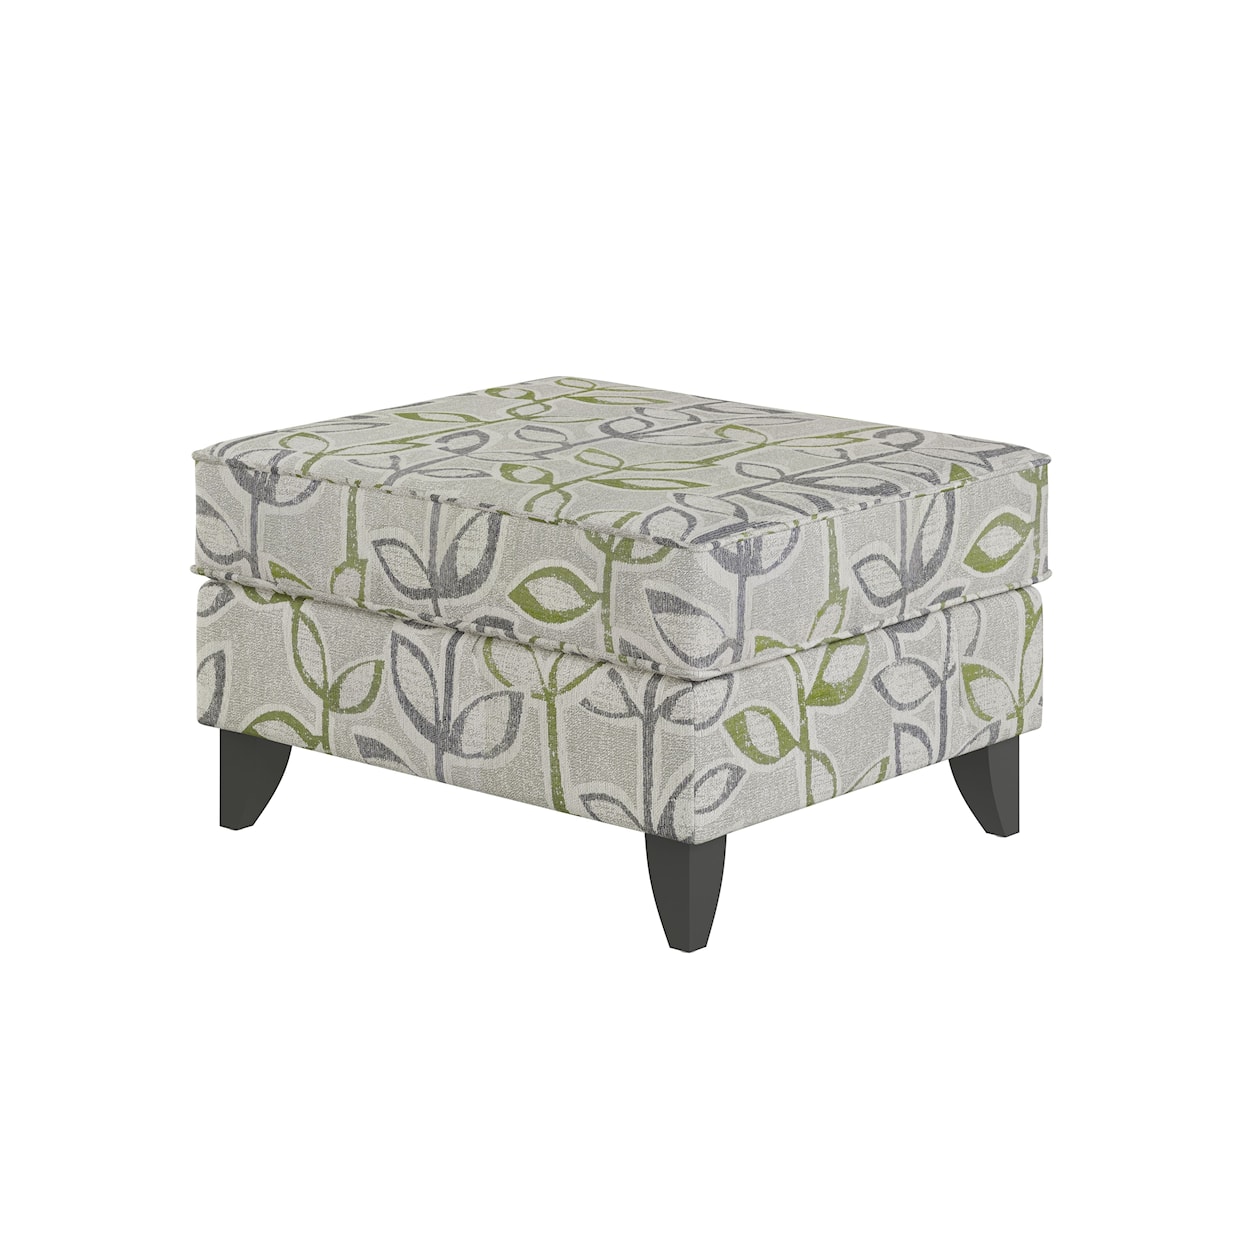 Fusion Furniture 1170 SATISFACTION METAL Accent Ottoman